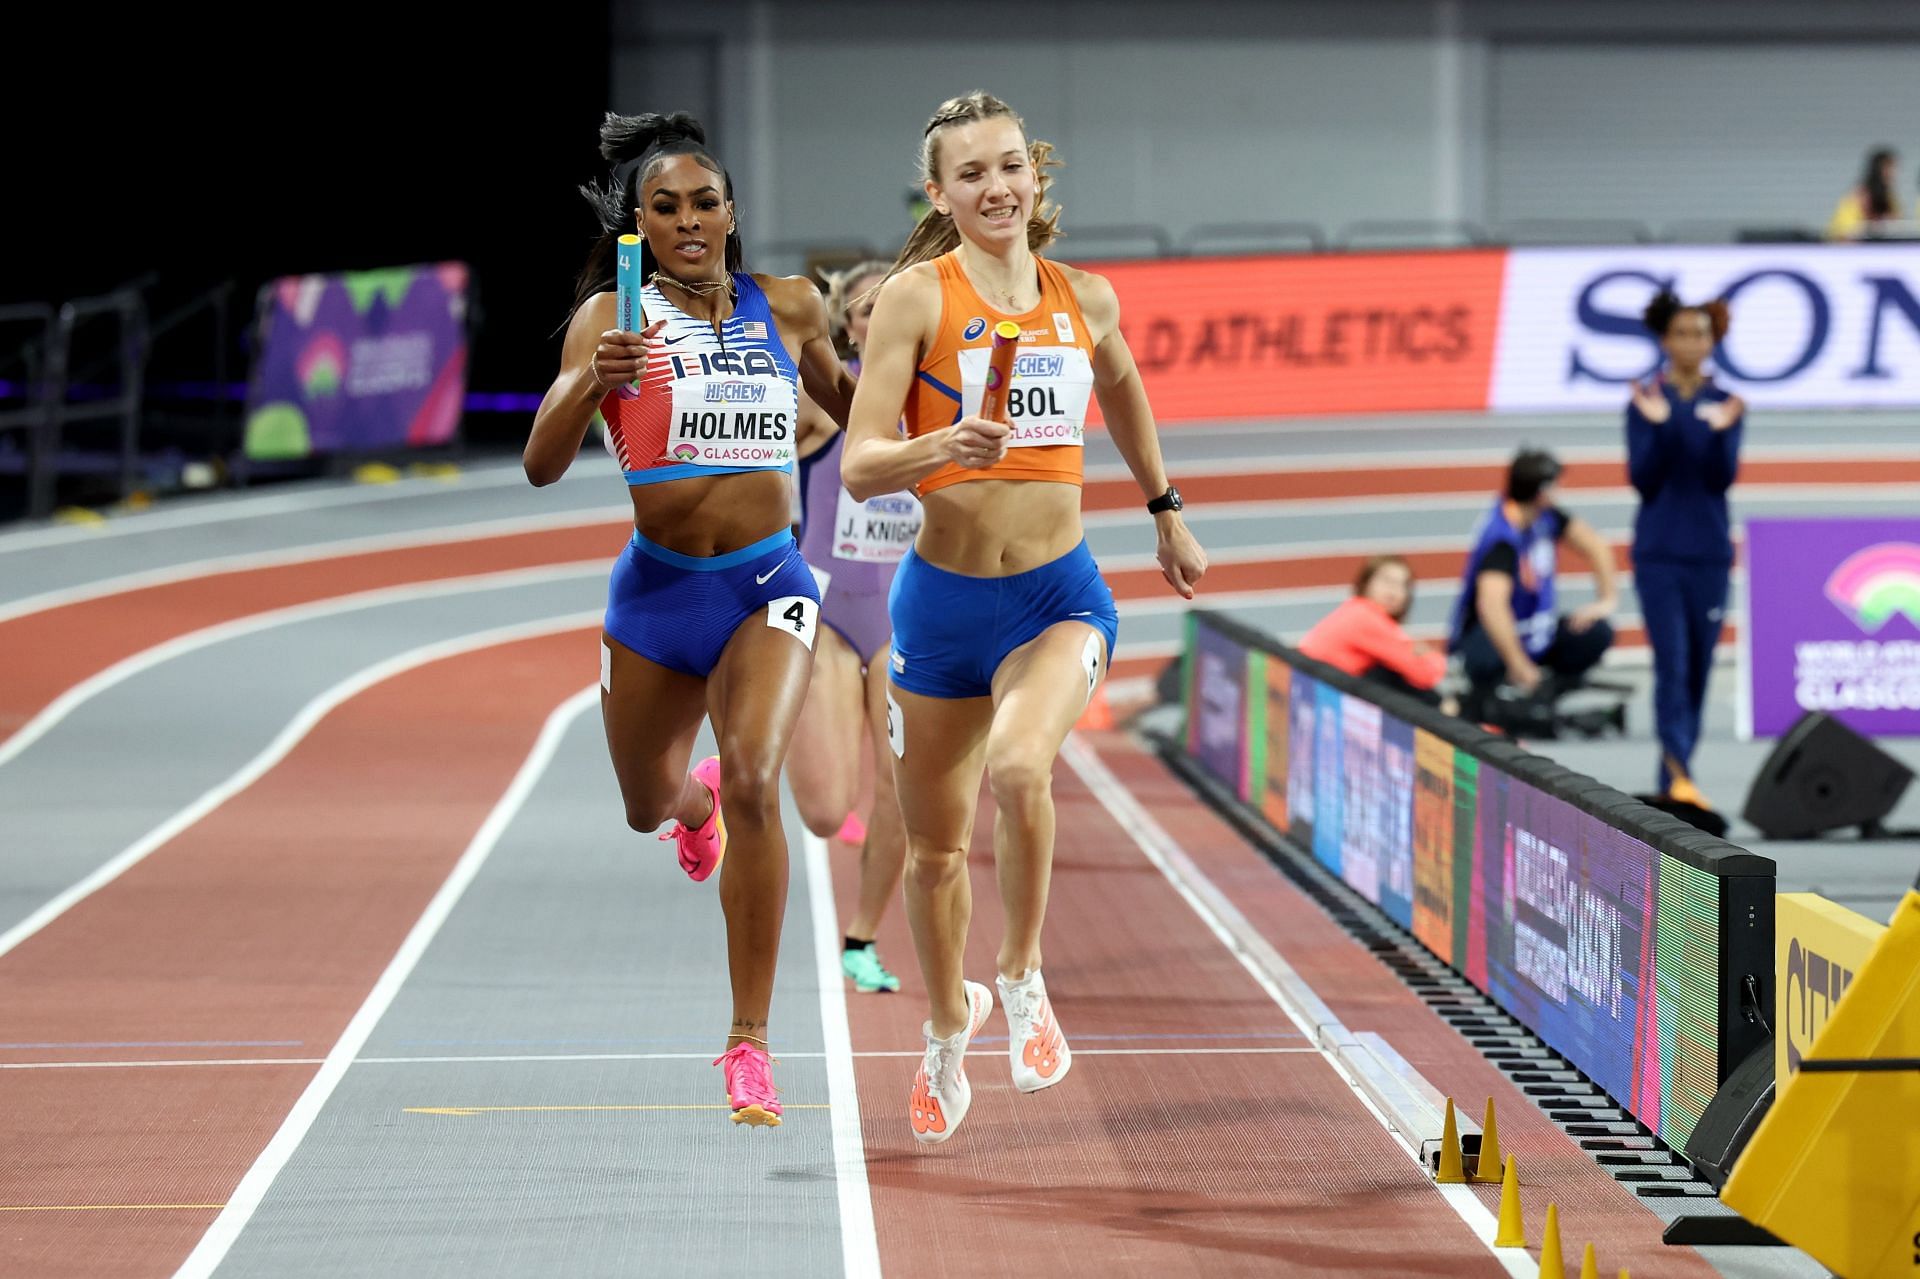 Femke Bol in the relay events of the World Indoor Athletics Championships in Glasgow